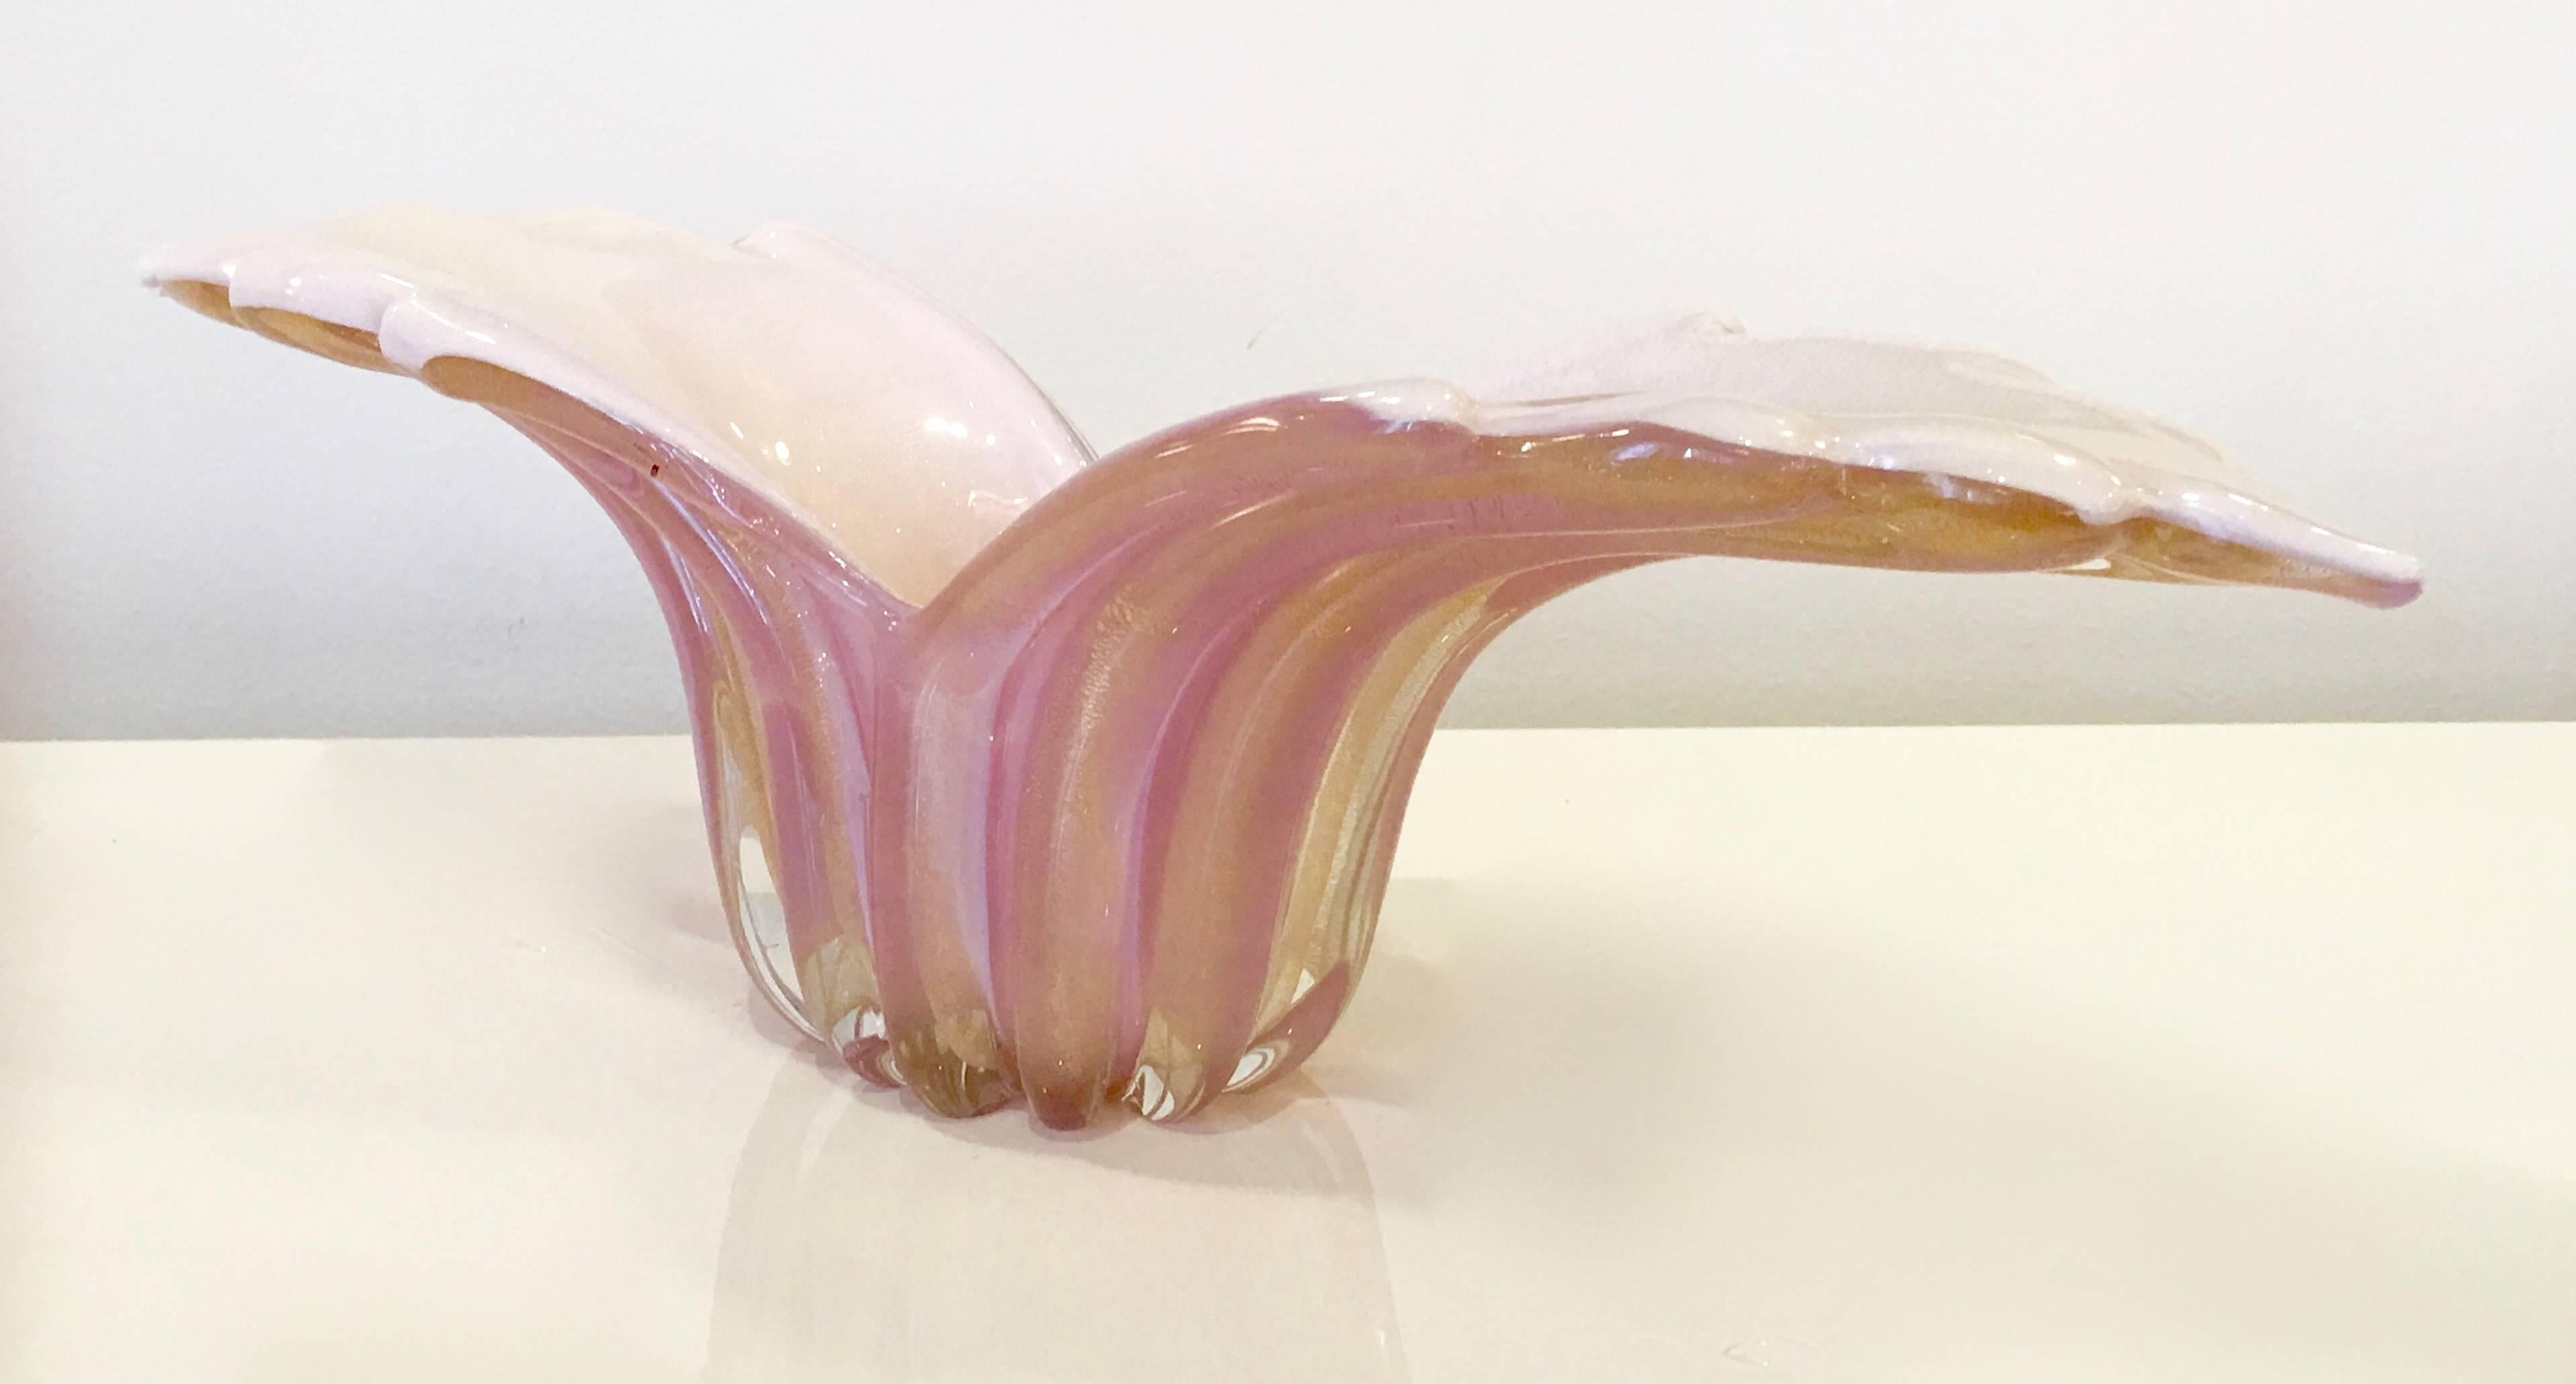 Gorgeous art glass piece by Murano master Alfredo Barbini. The piece is done in a Sommerso cased glass technique with a creamy white interior and a lovely pink exterior. The piece is accented with gold dust inclusions.